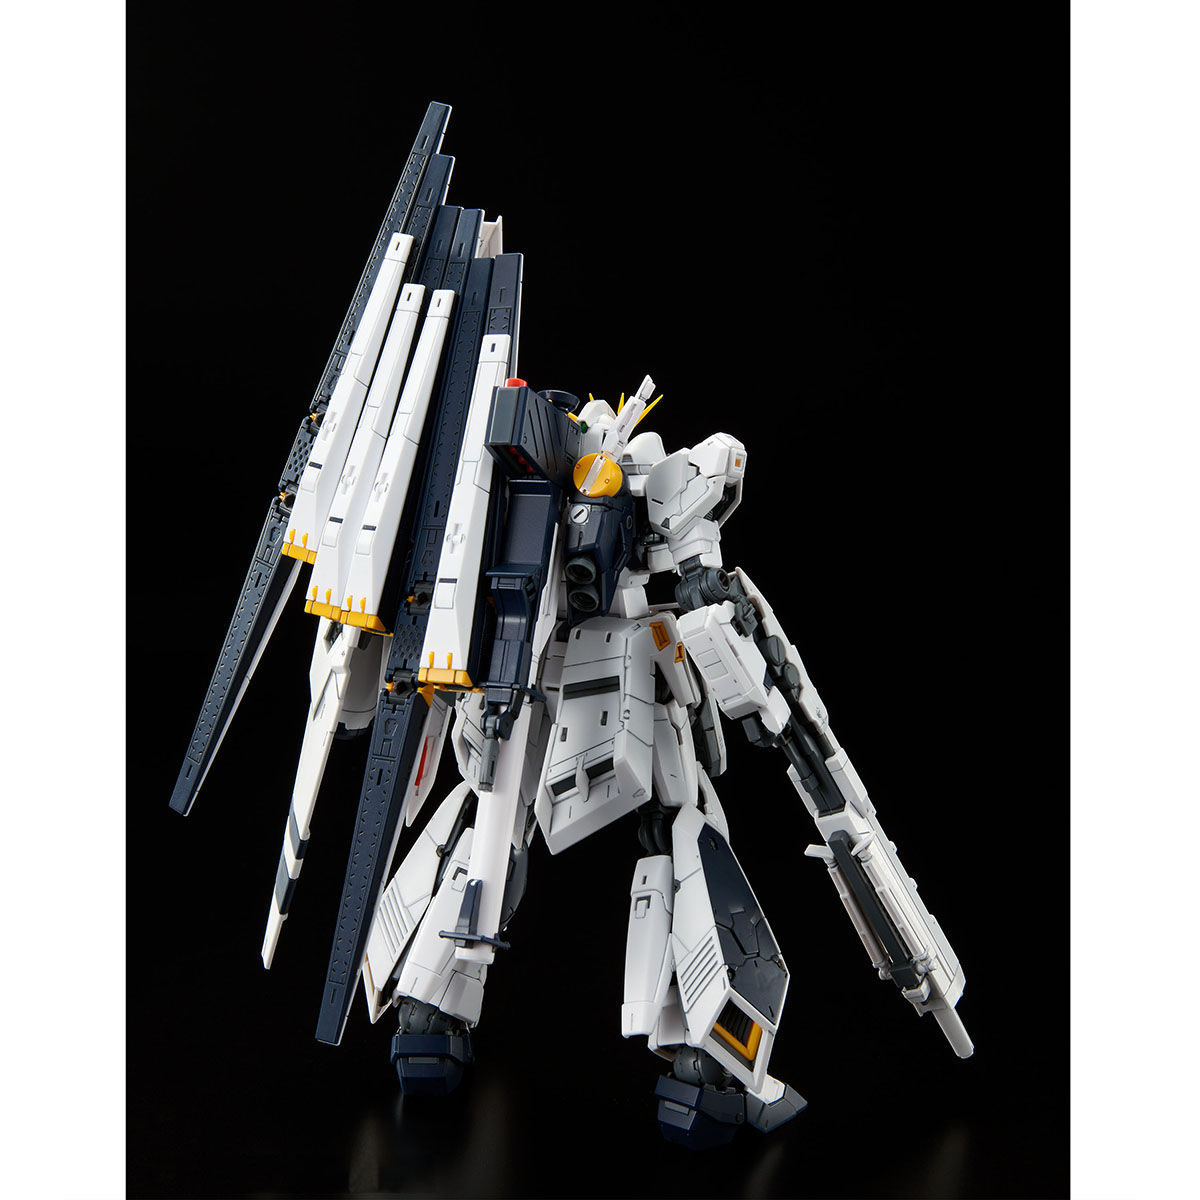 Rg 1 144 Hws Expansion Set For N Gundam Nov 2020 Delivery Gundam Premium Bandai Usa Online Store For Action Figures Model Kits Toys And More